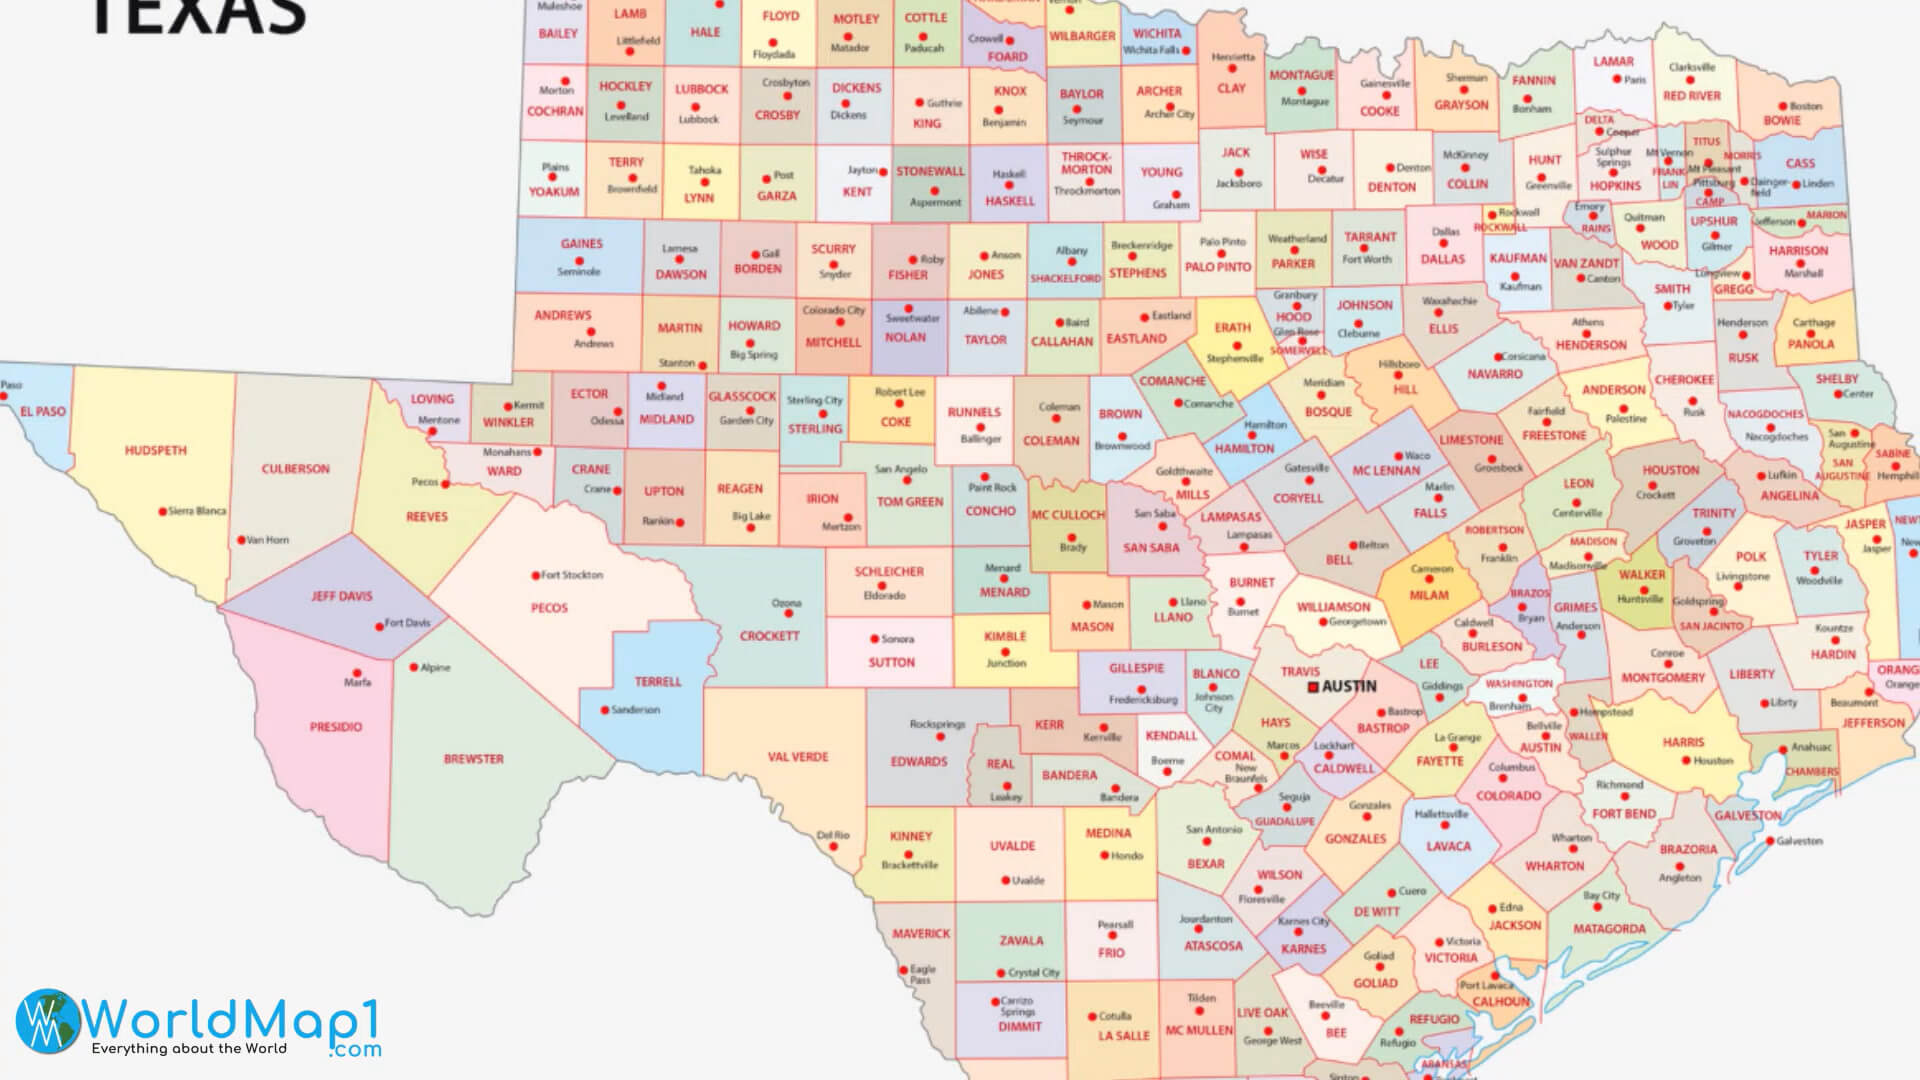 Texas Counties Map in the US